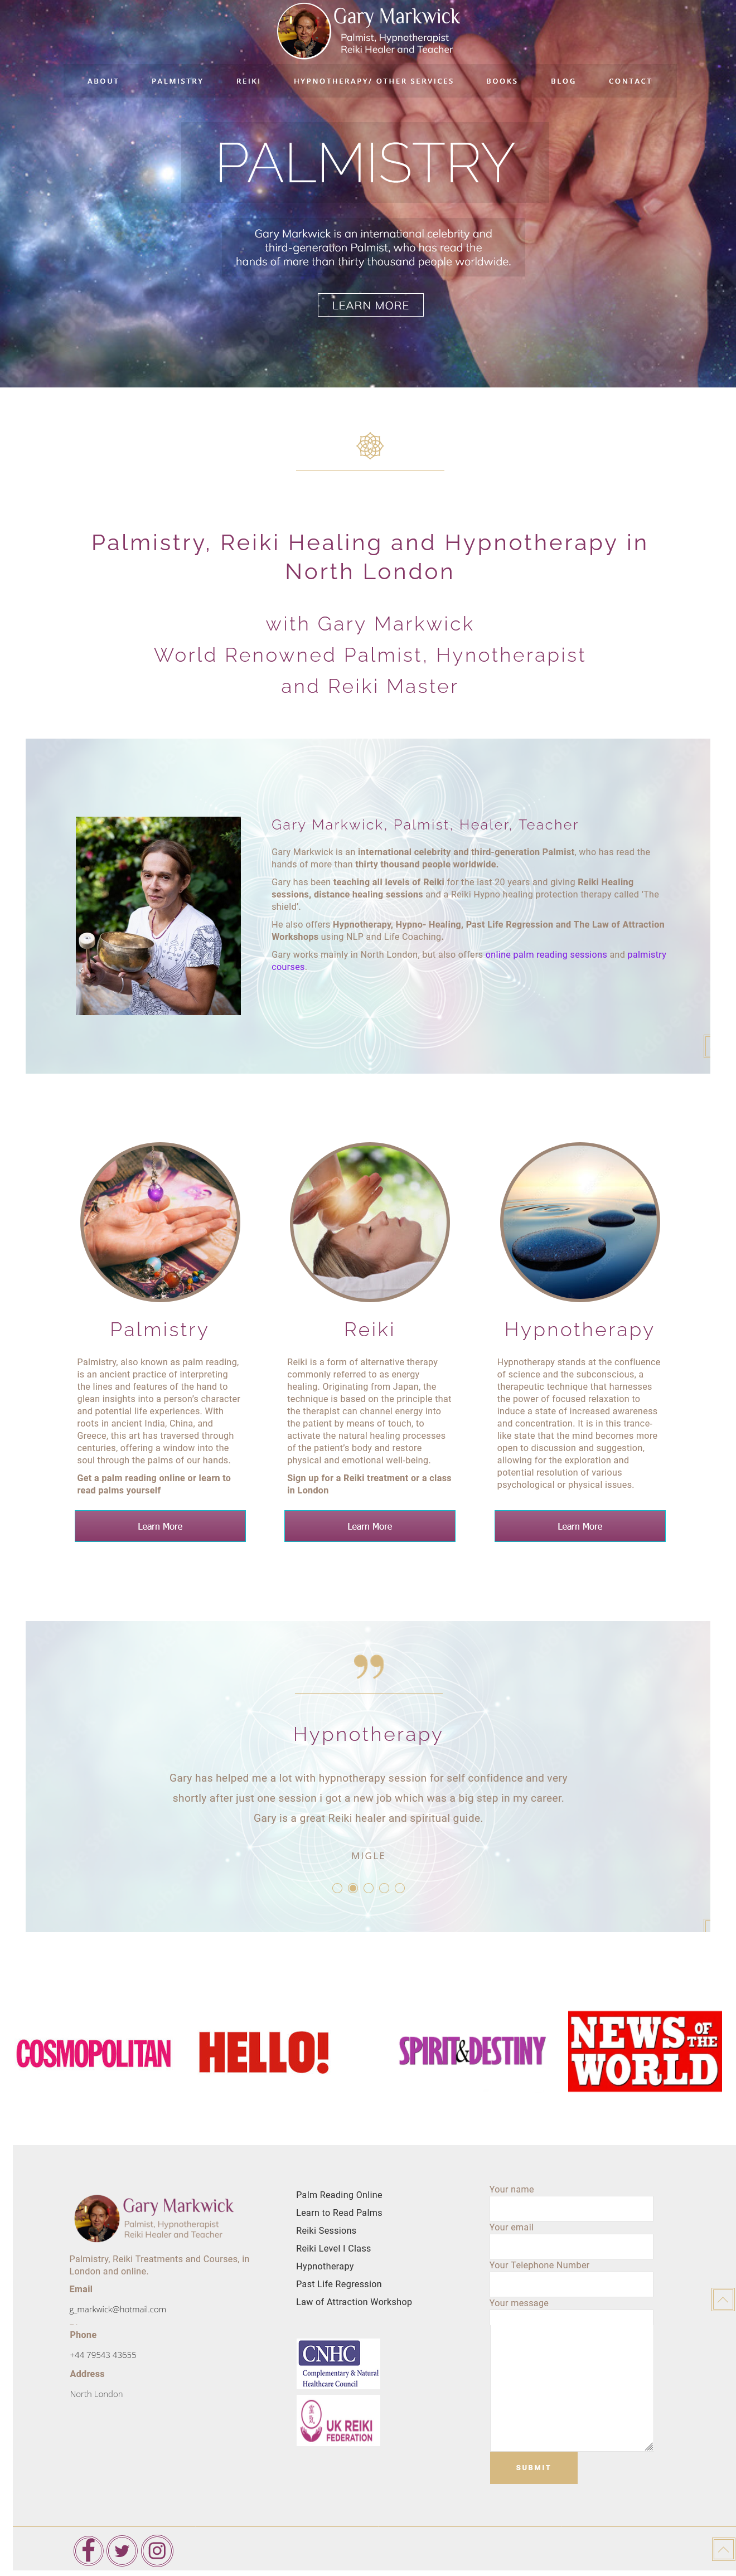 Reiki and Hypnotherapy Website